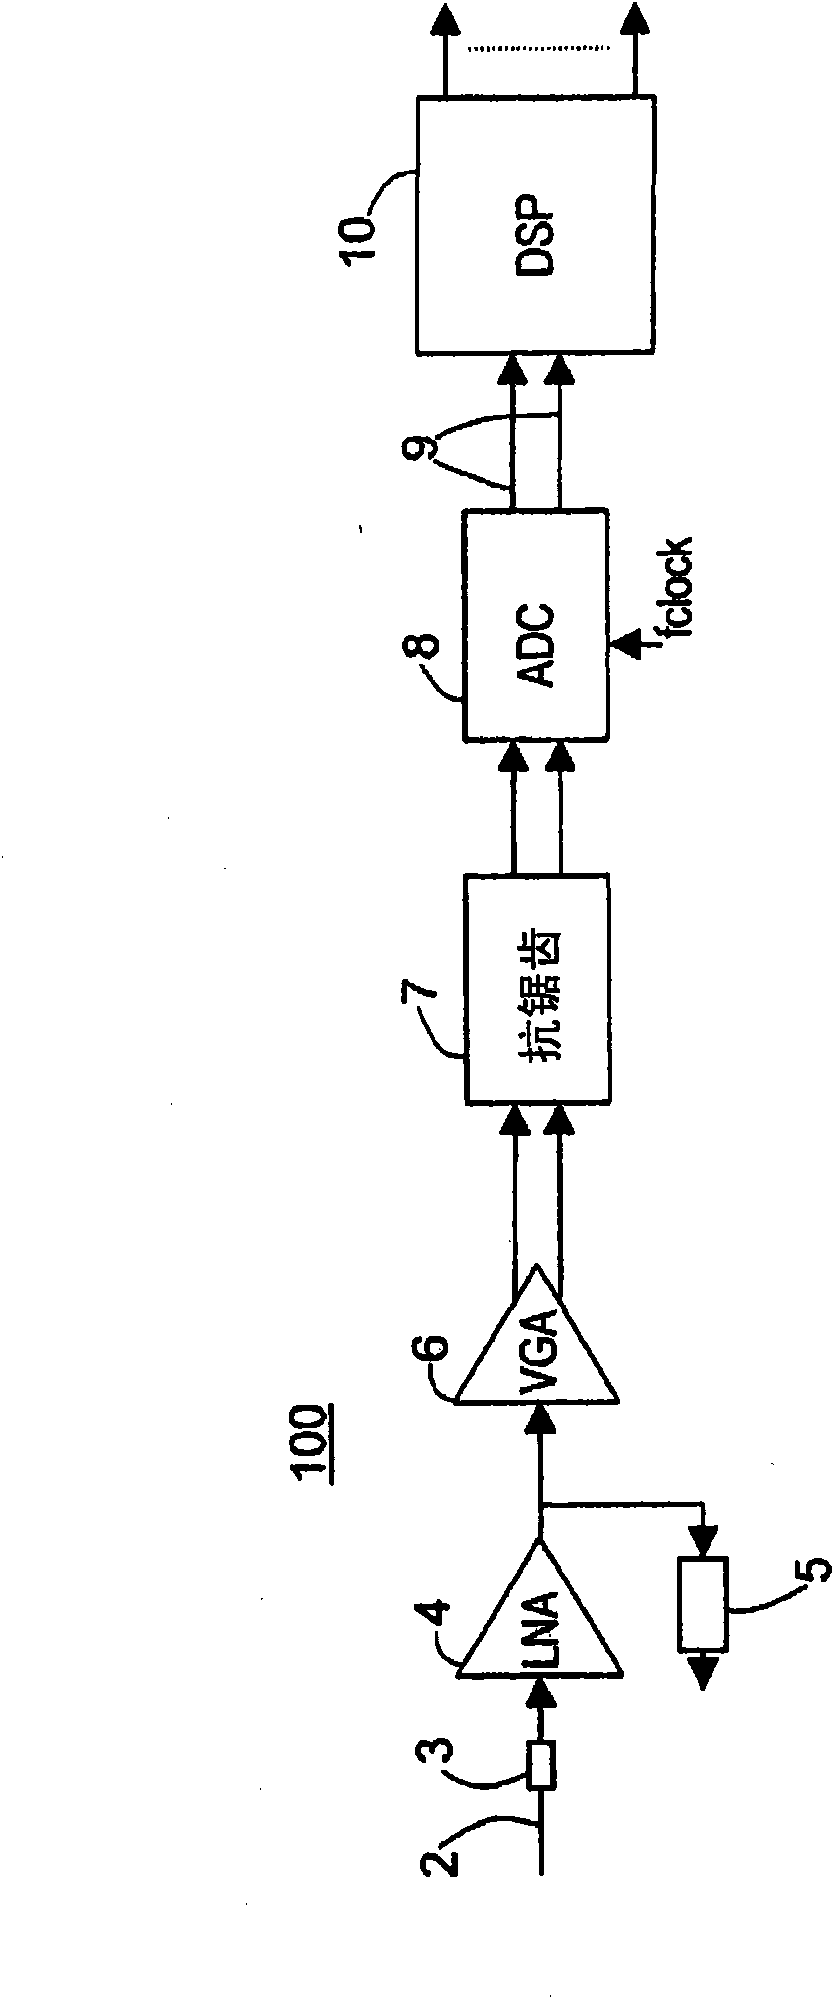 Device for receiving a RF signal with loop-through output and method for looping a RF input signal through a device for receiving RF signals